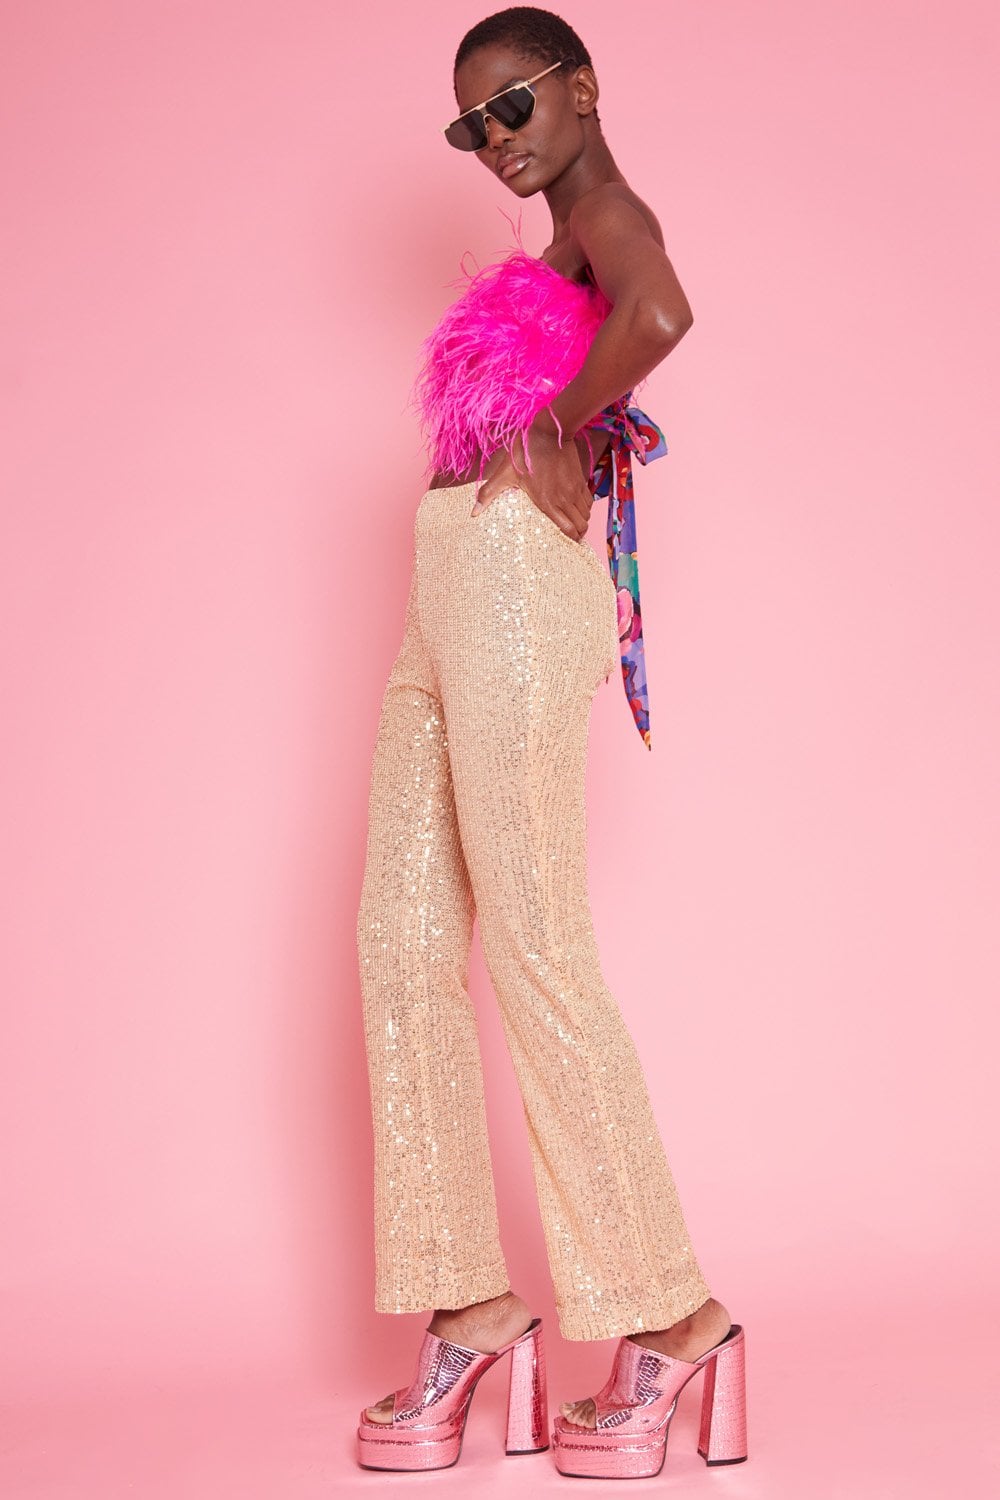 Sequin Pants - Have Need Want